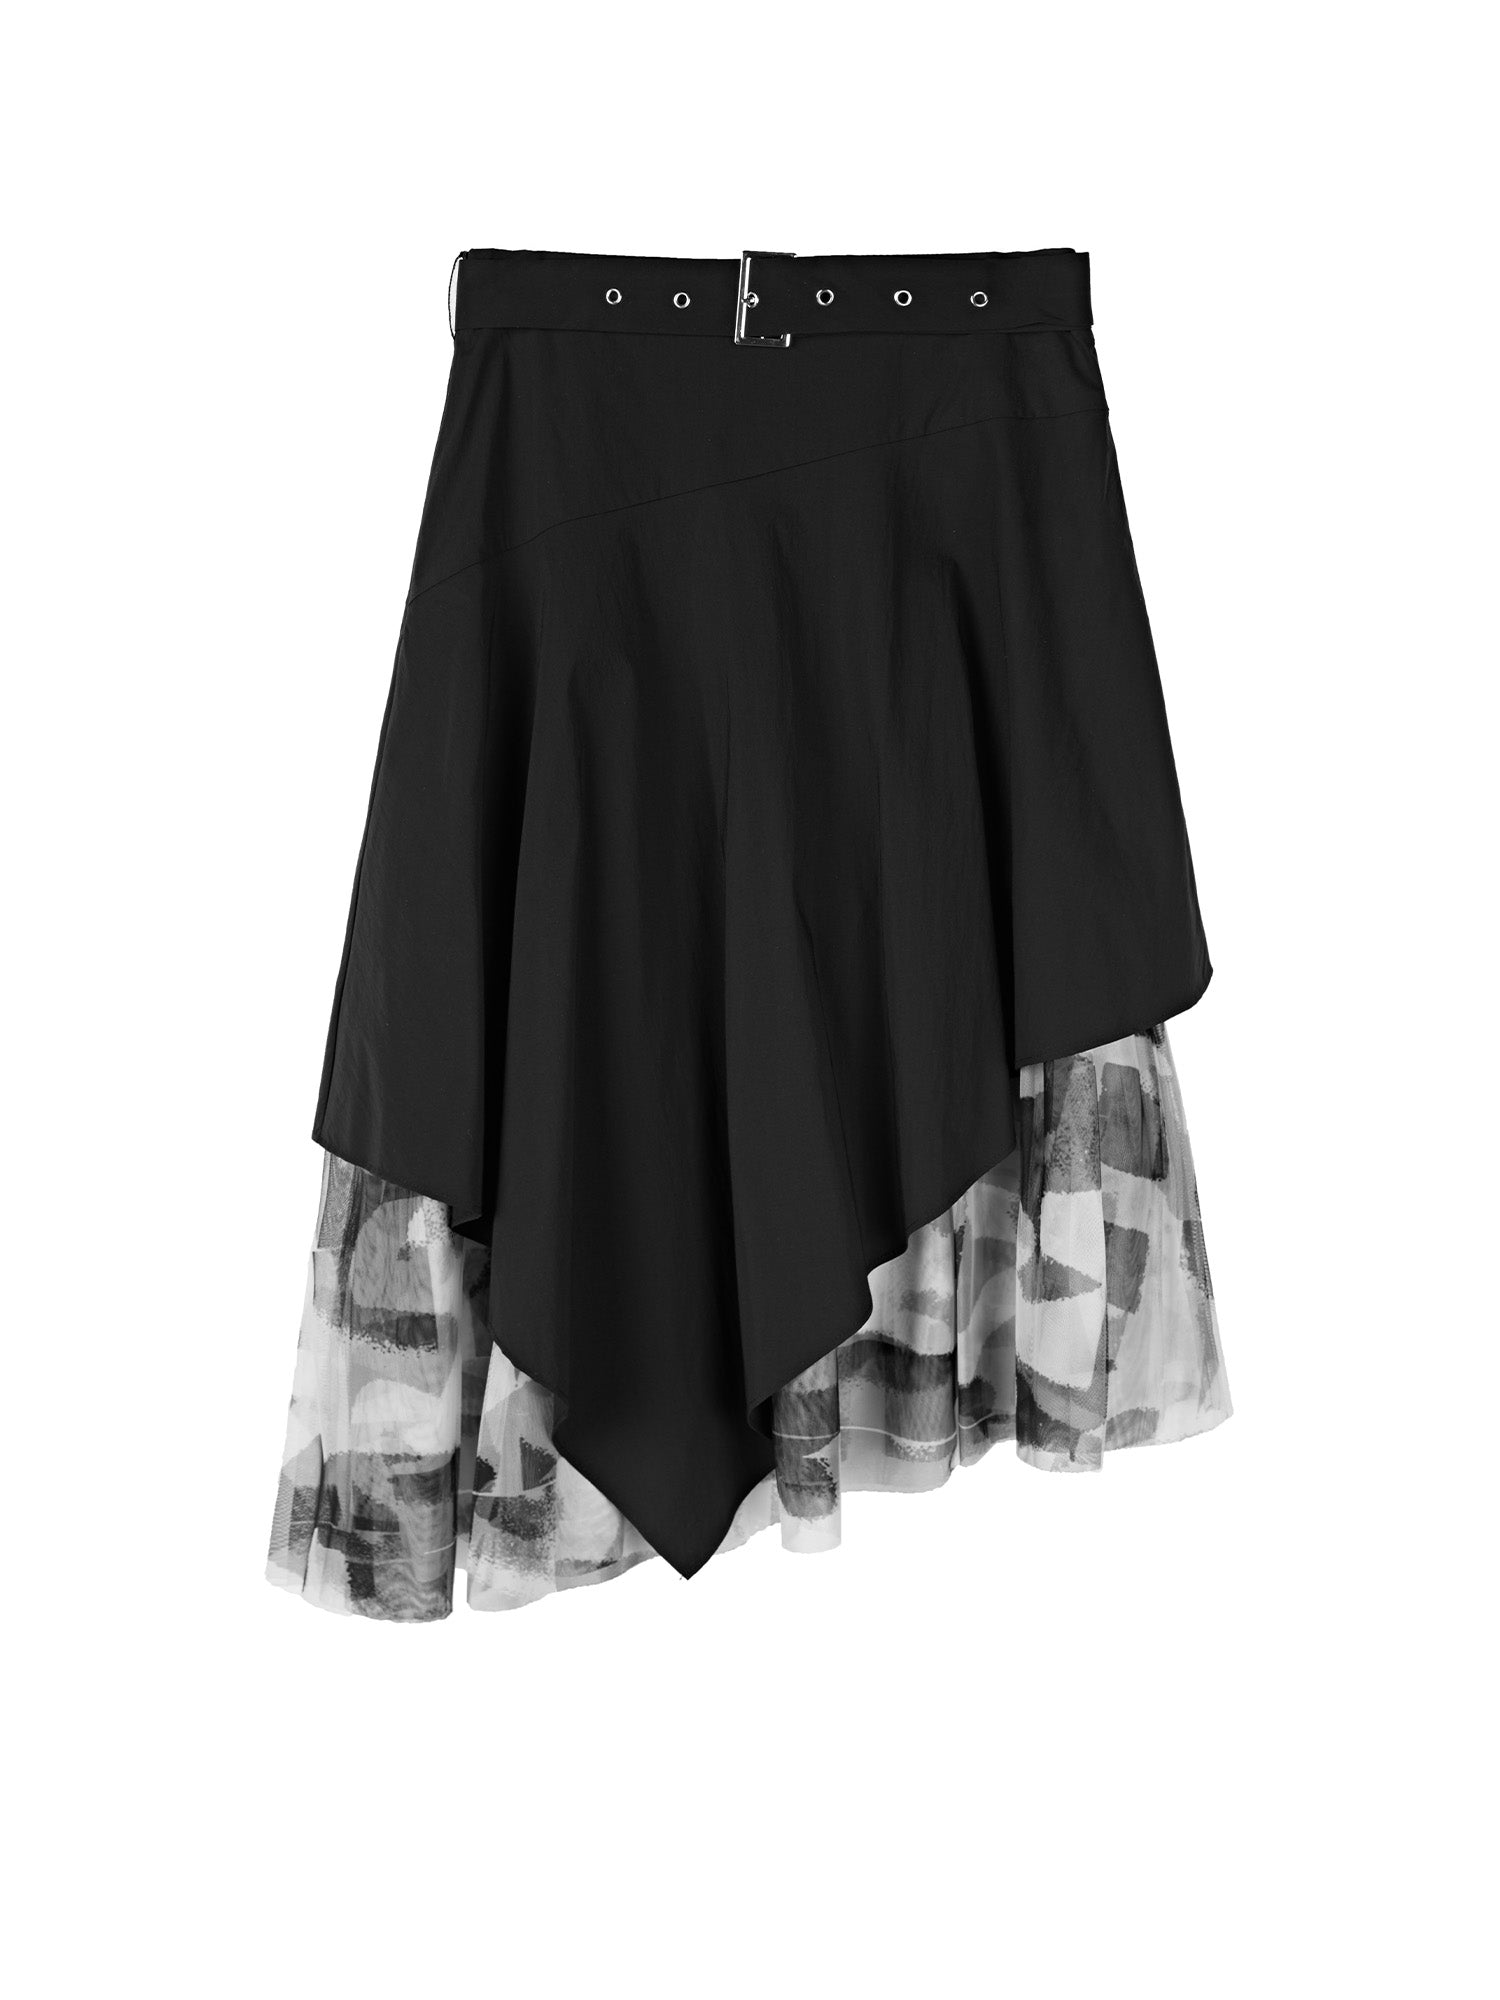 The unique design of the long skirt adds a touch of personality to women's outfits